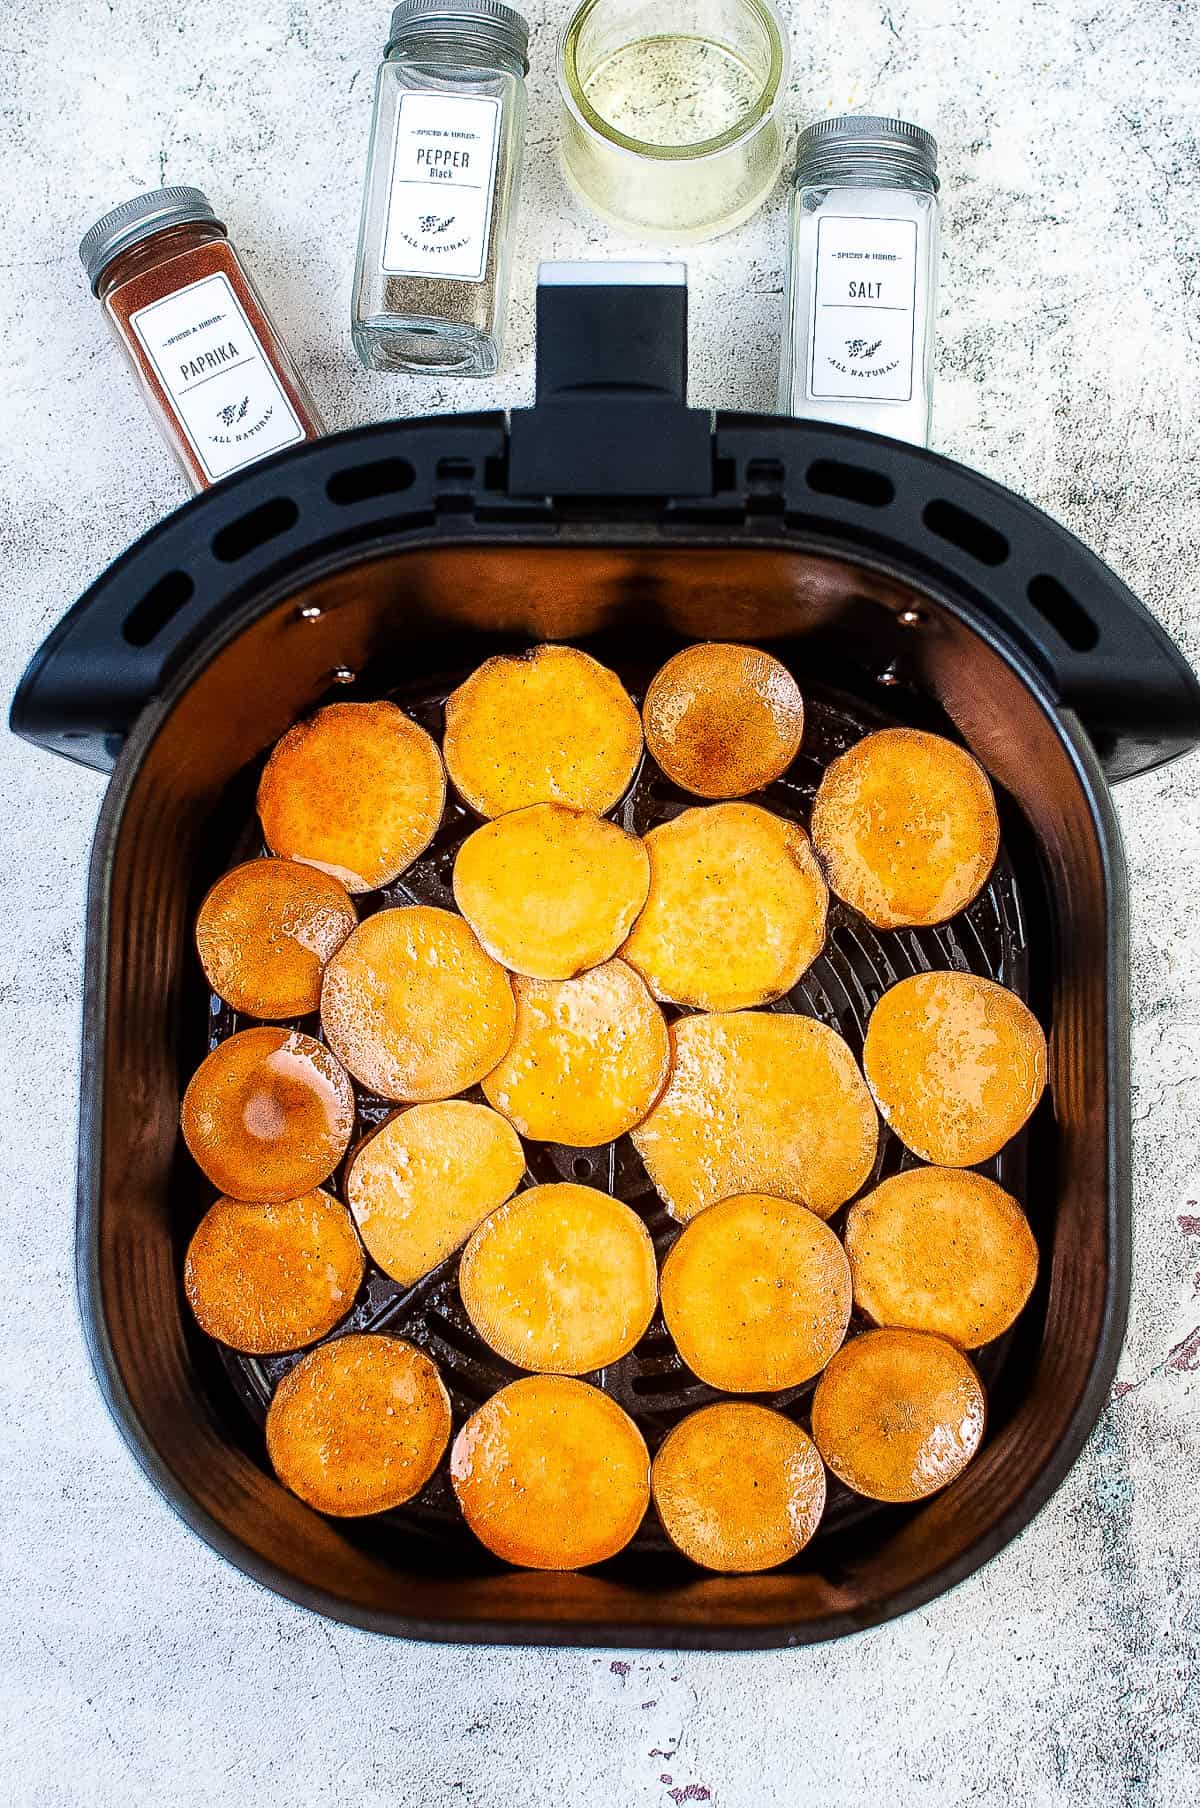 Sweet potato slices arranged in the air fryer basket.